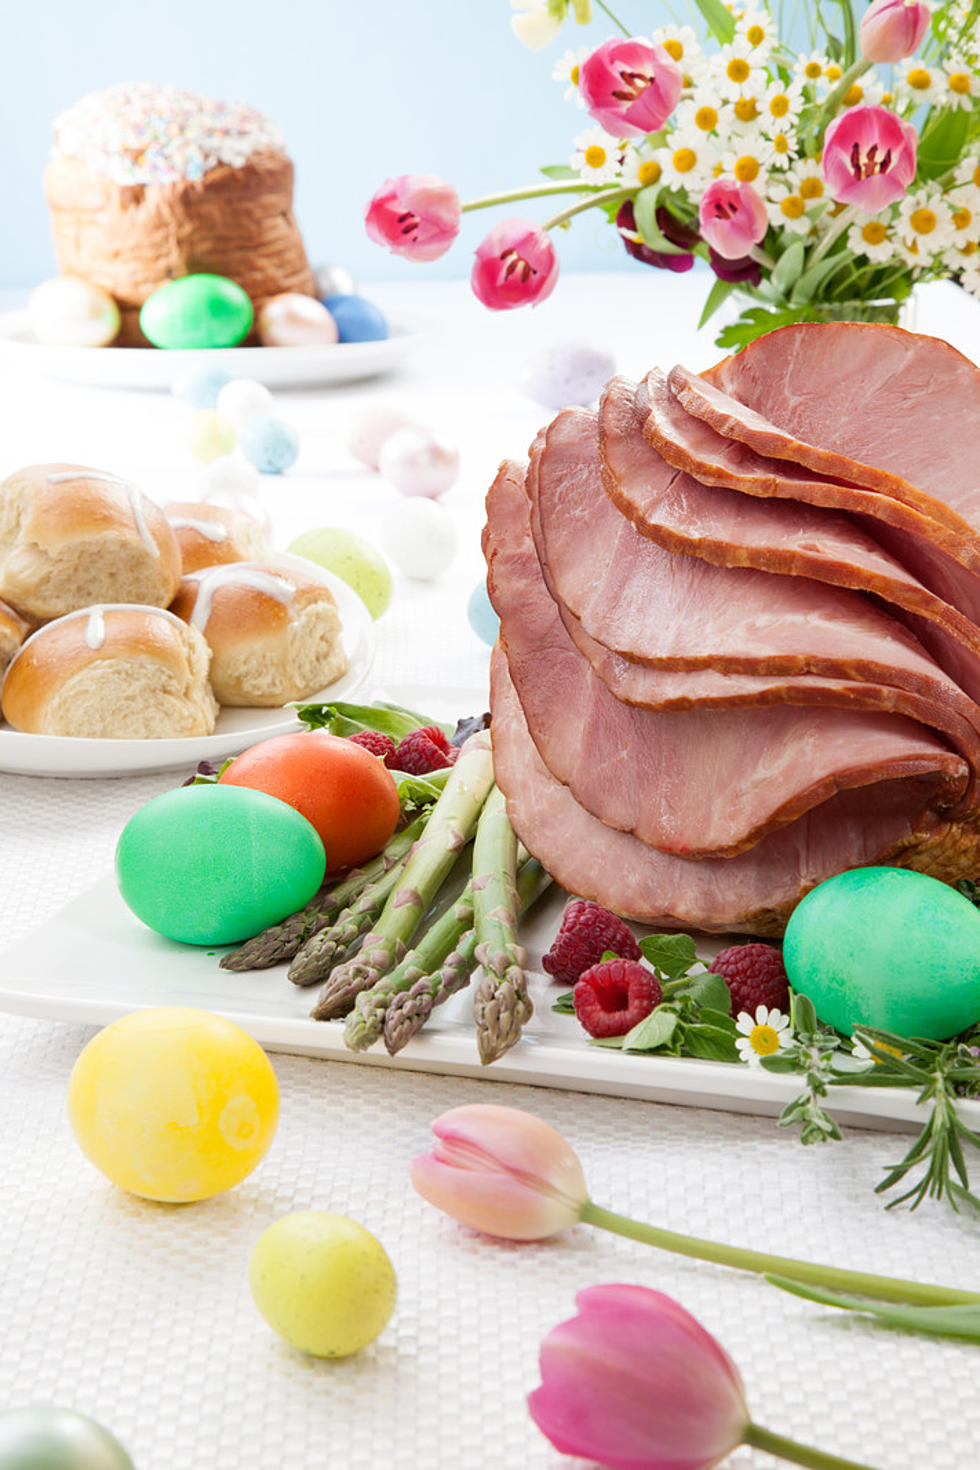 Will Your Easter Dinner Cost More This Year? Let’s Find Out